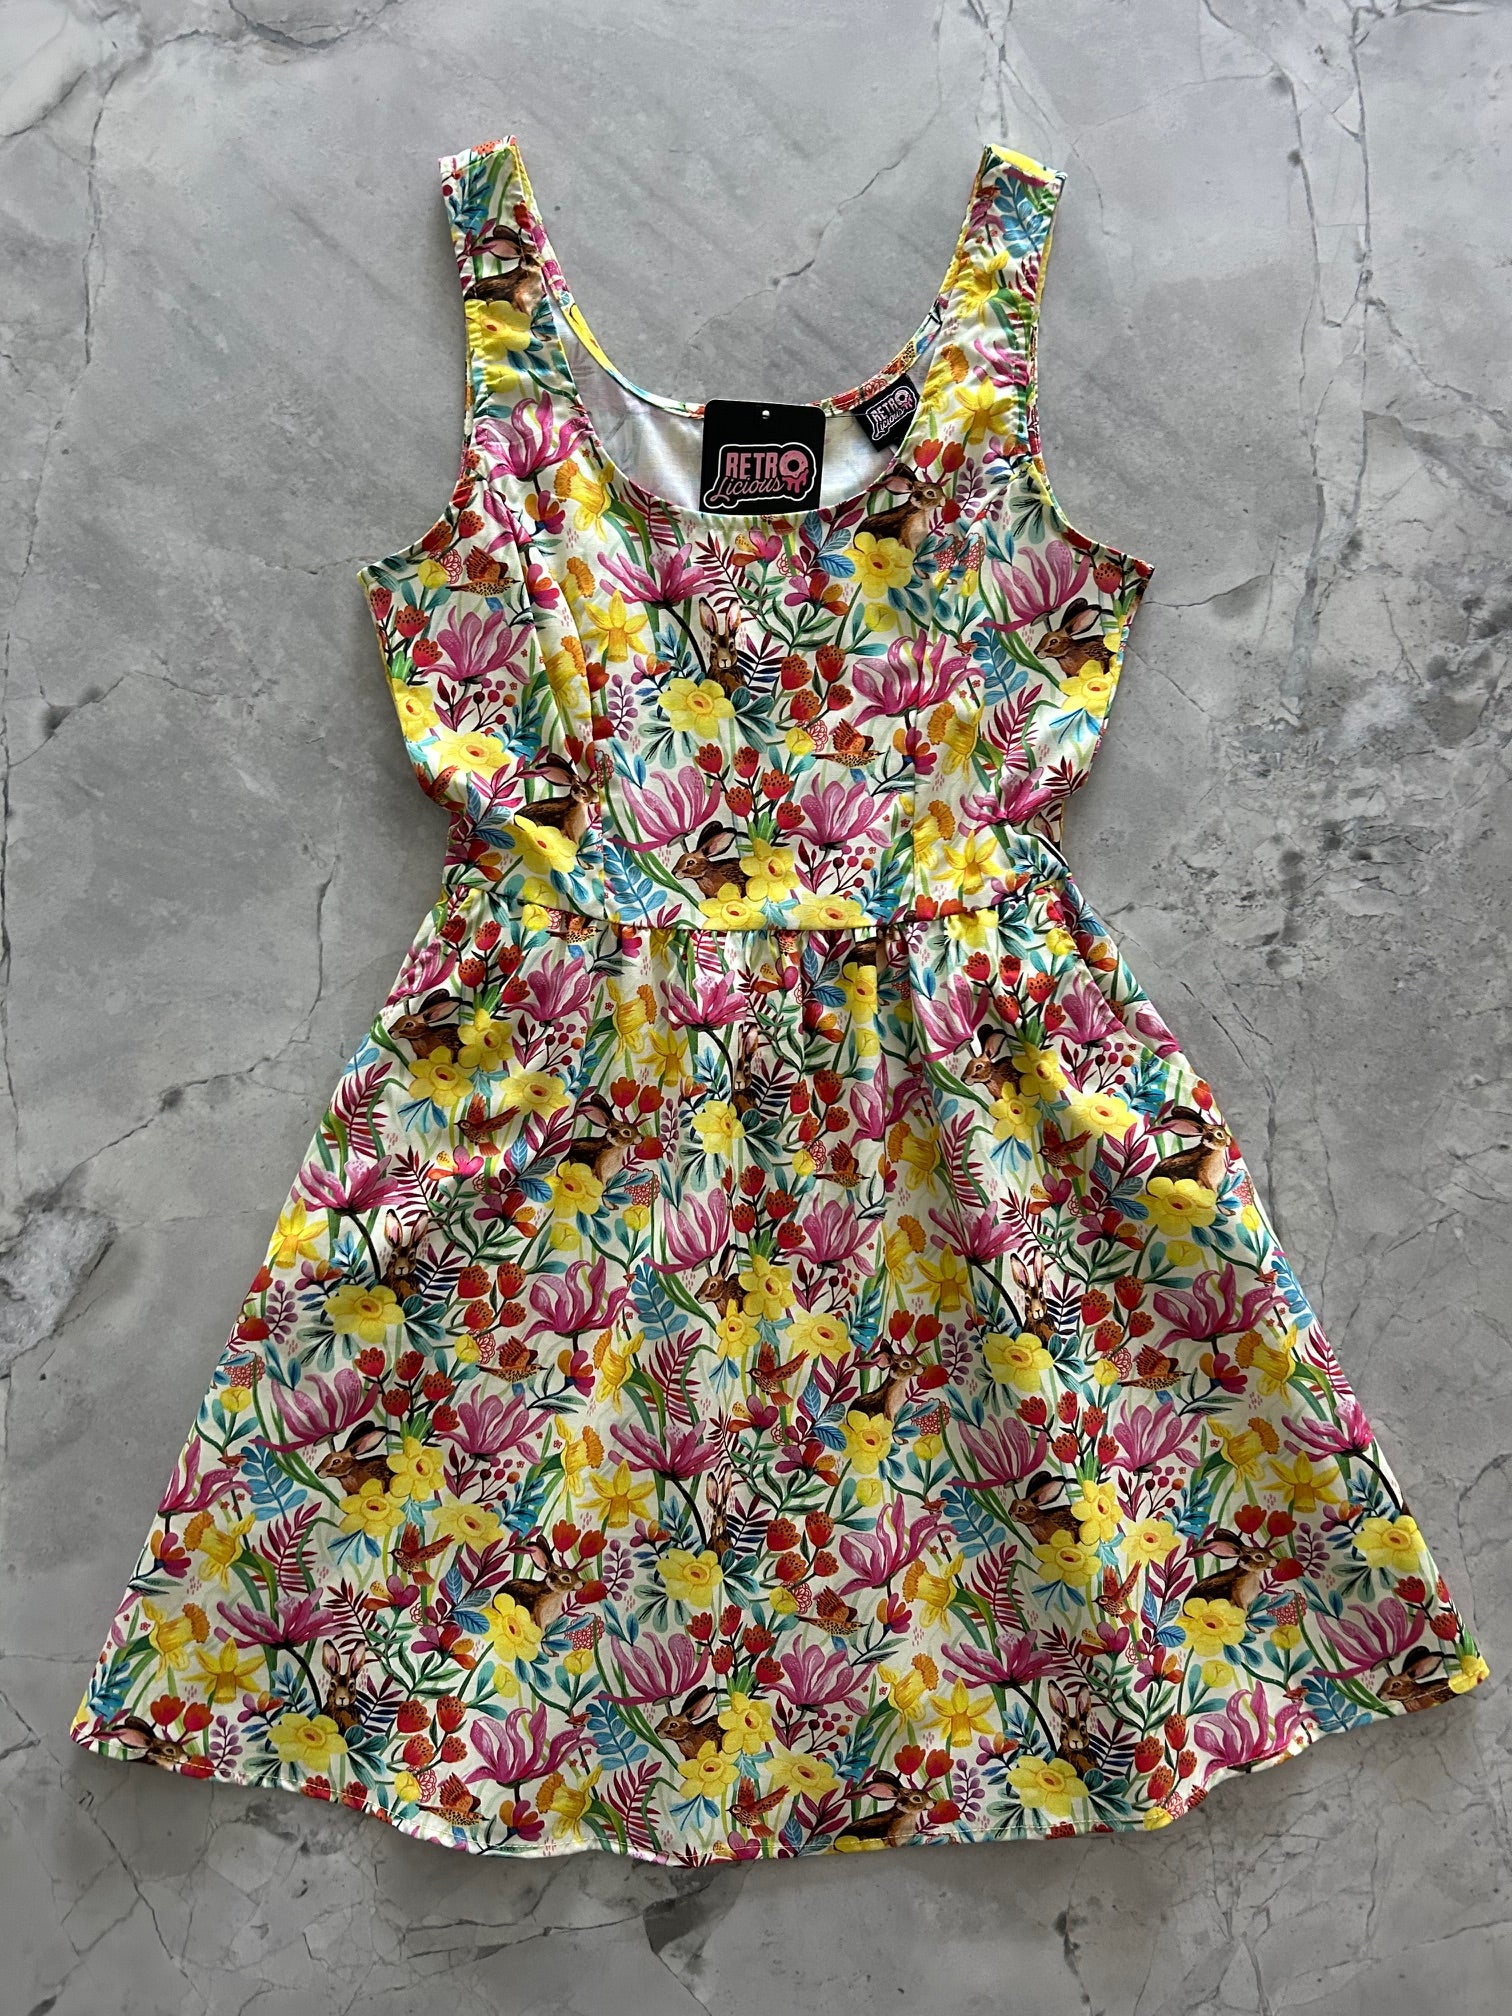 flatlay image of the front of the dress with yellow flowers and bunnies